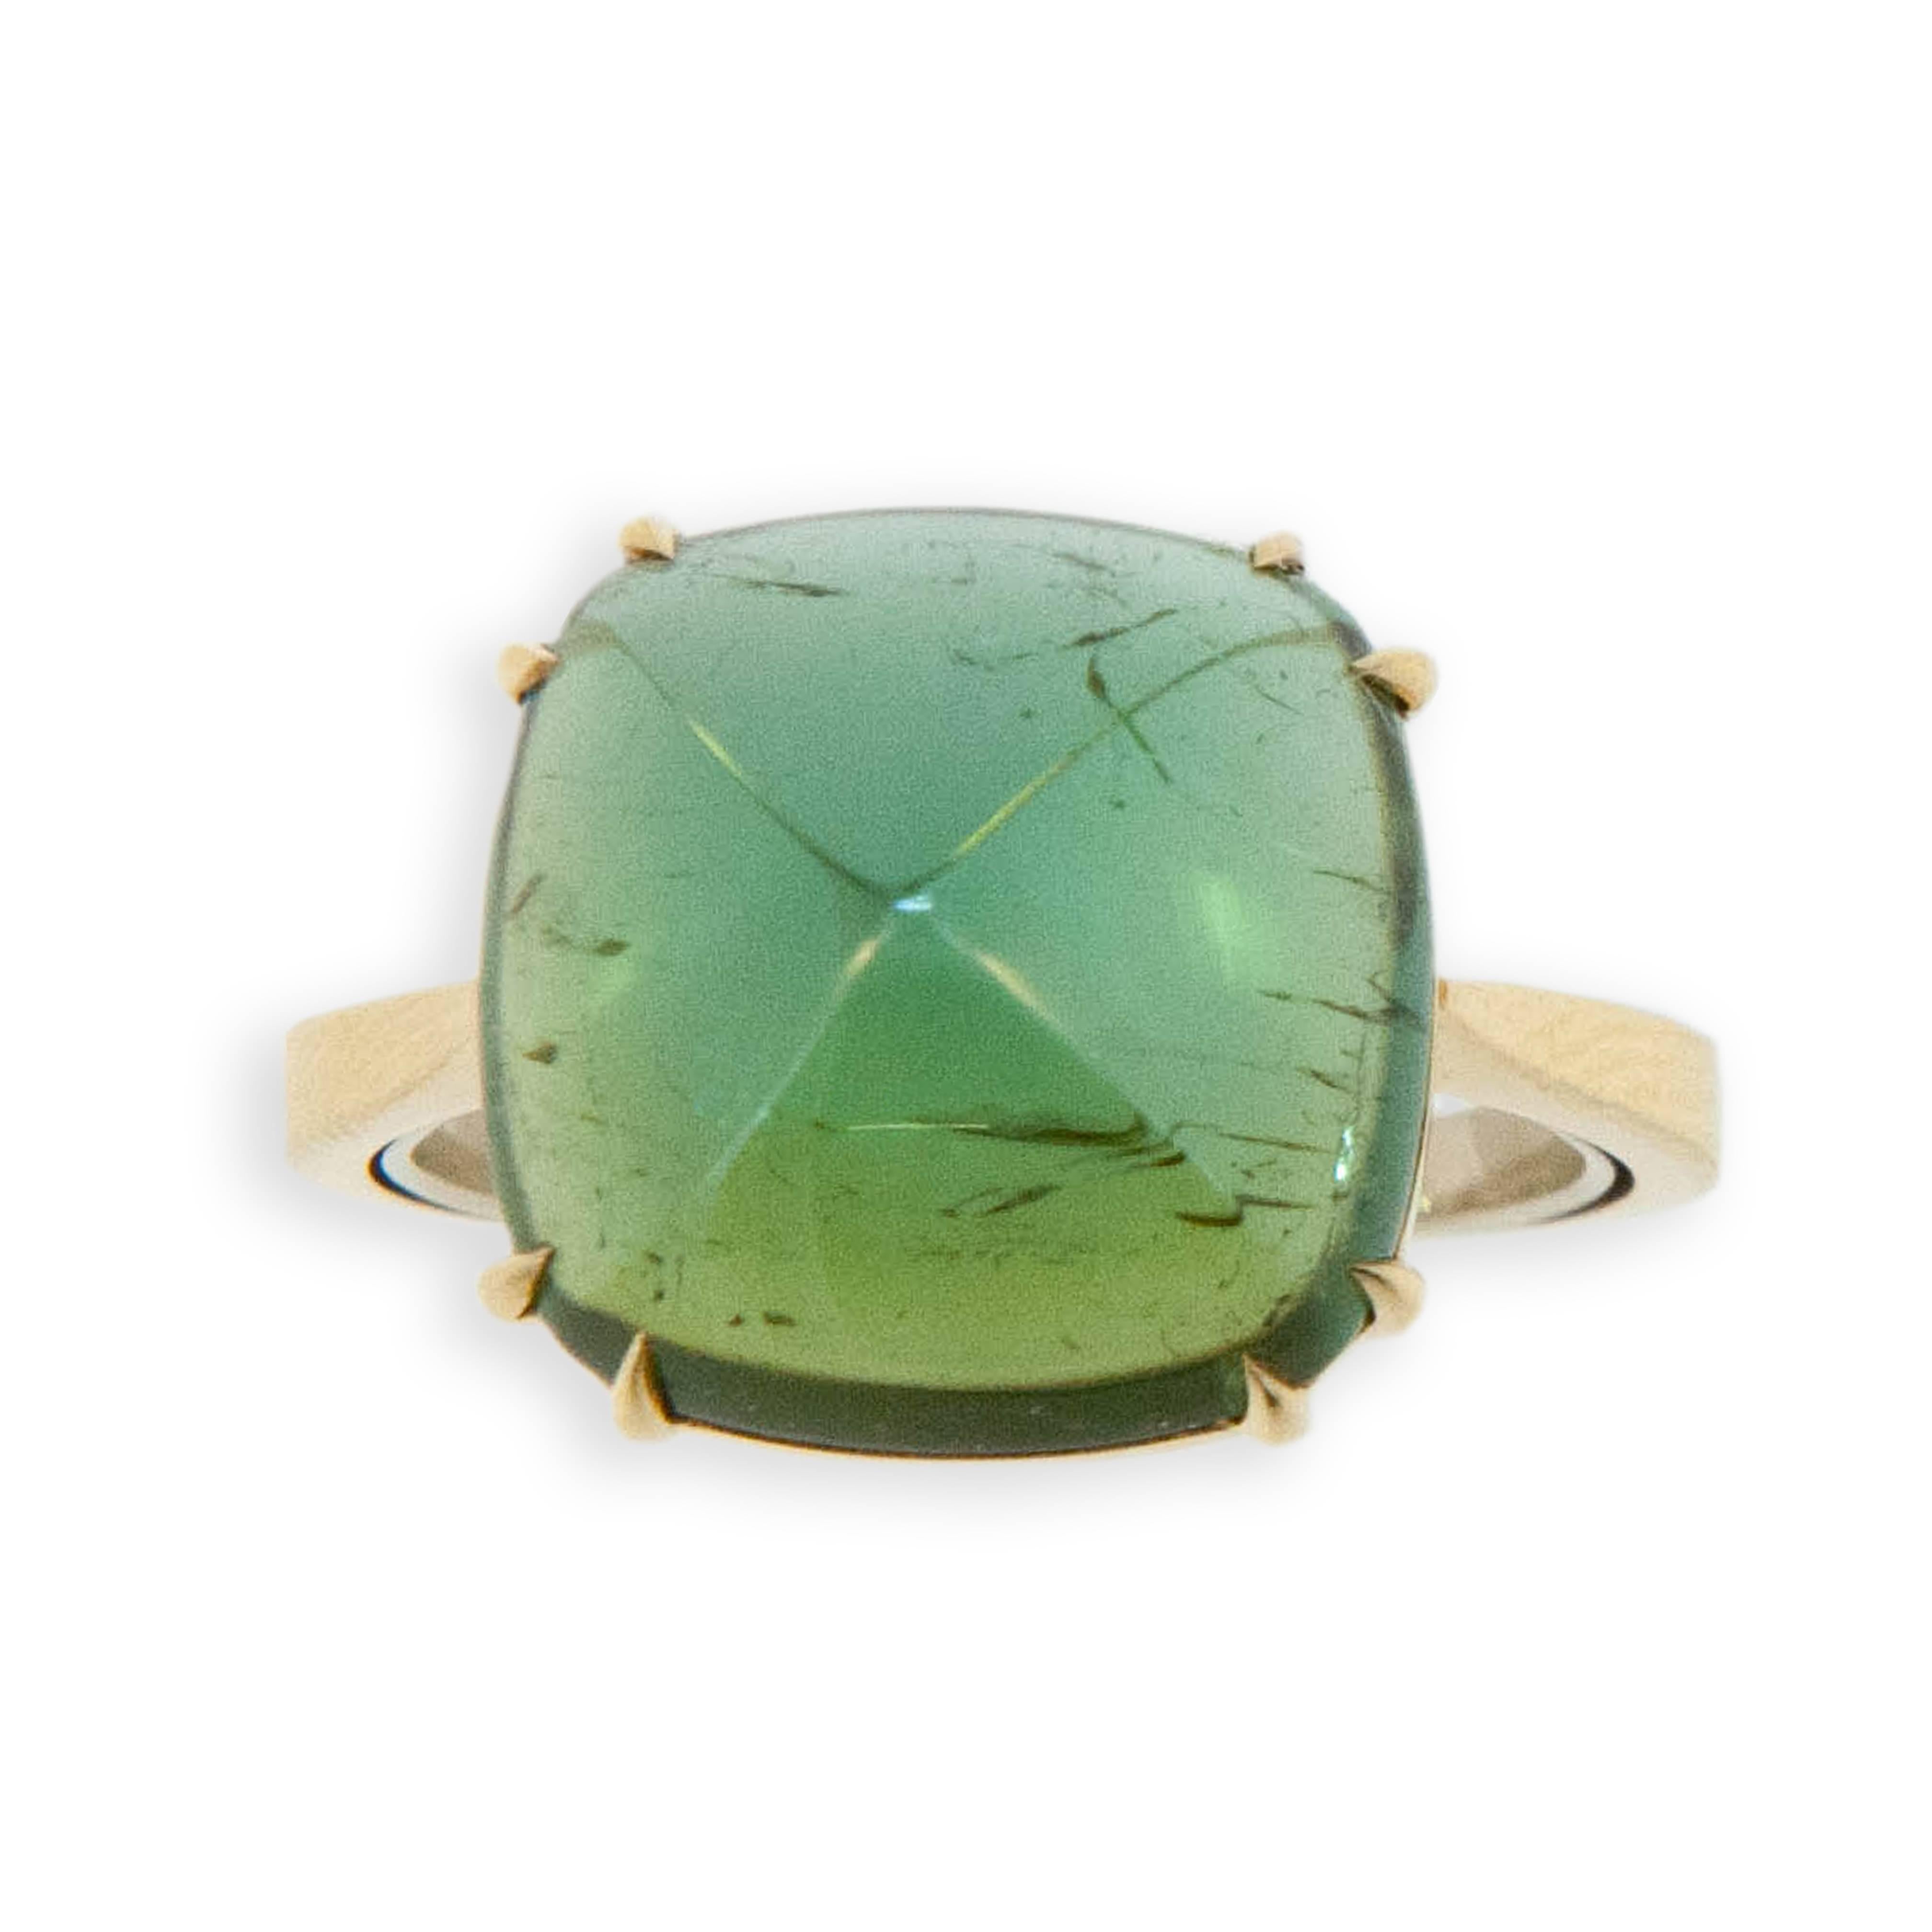 18 karat yellow gold ring set with one square cushion cut sugarloaf Green Tourmaline 8.96 carats. Double prongs. Ring is a size 6.5 with a horseshoe.